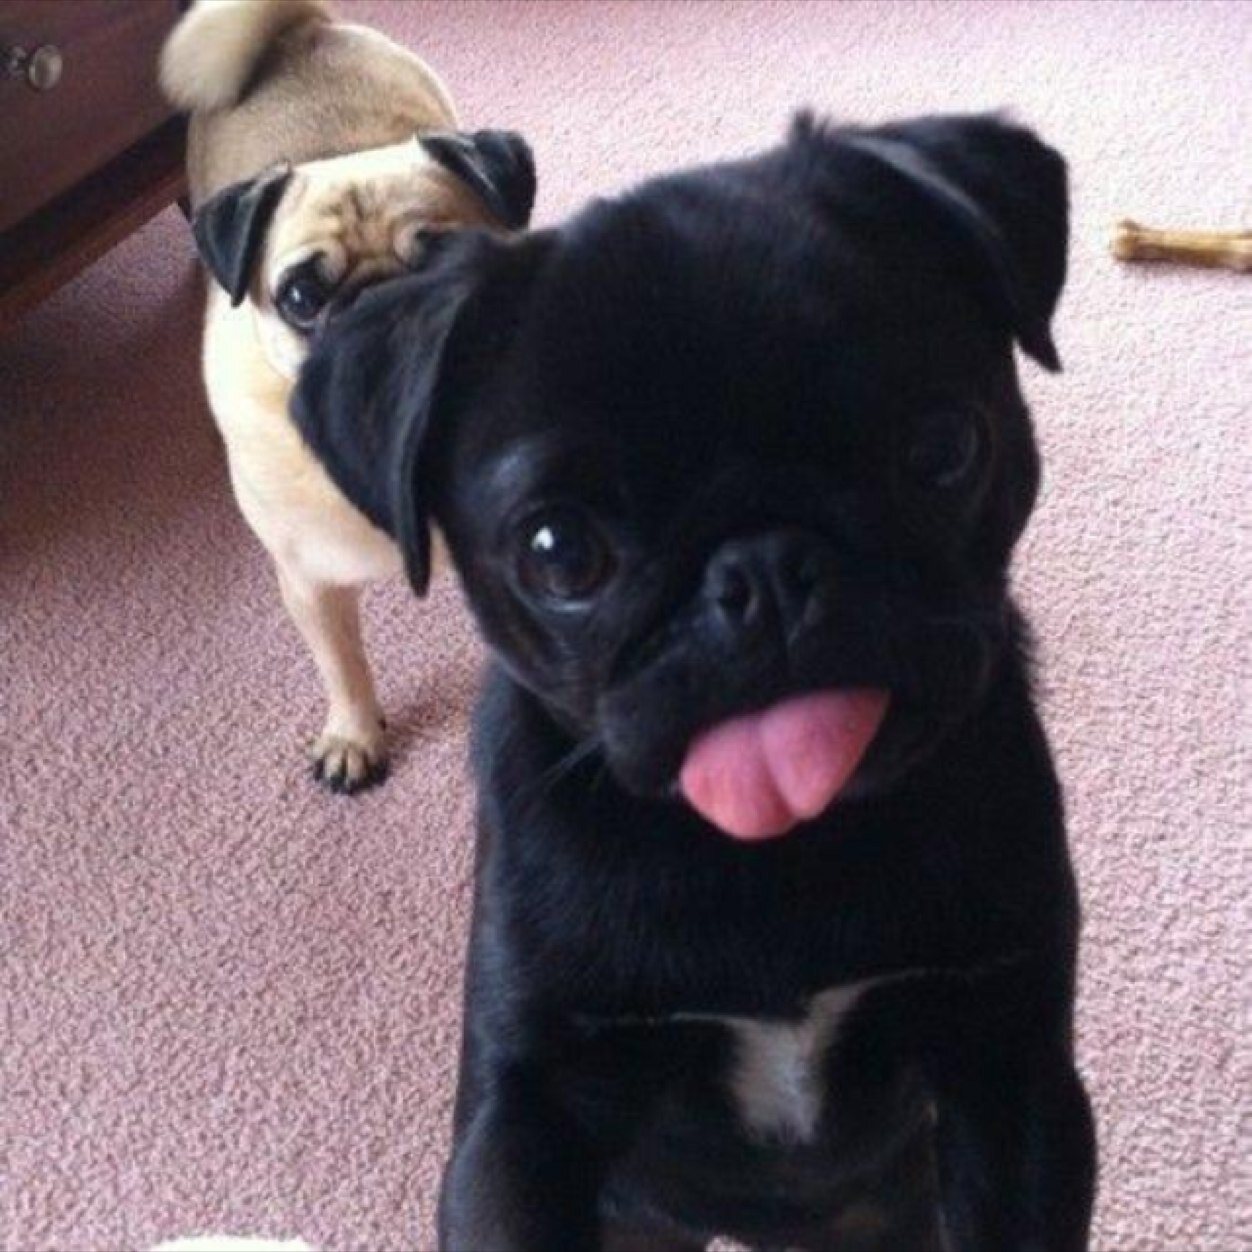 A black Pug standing up with its begging face and tongue out